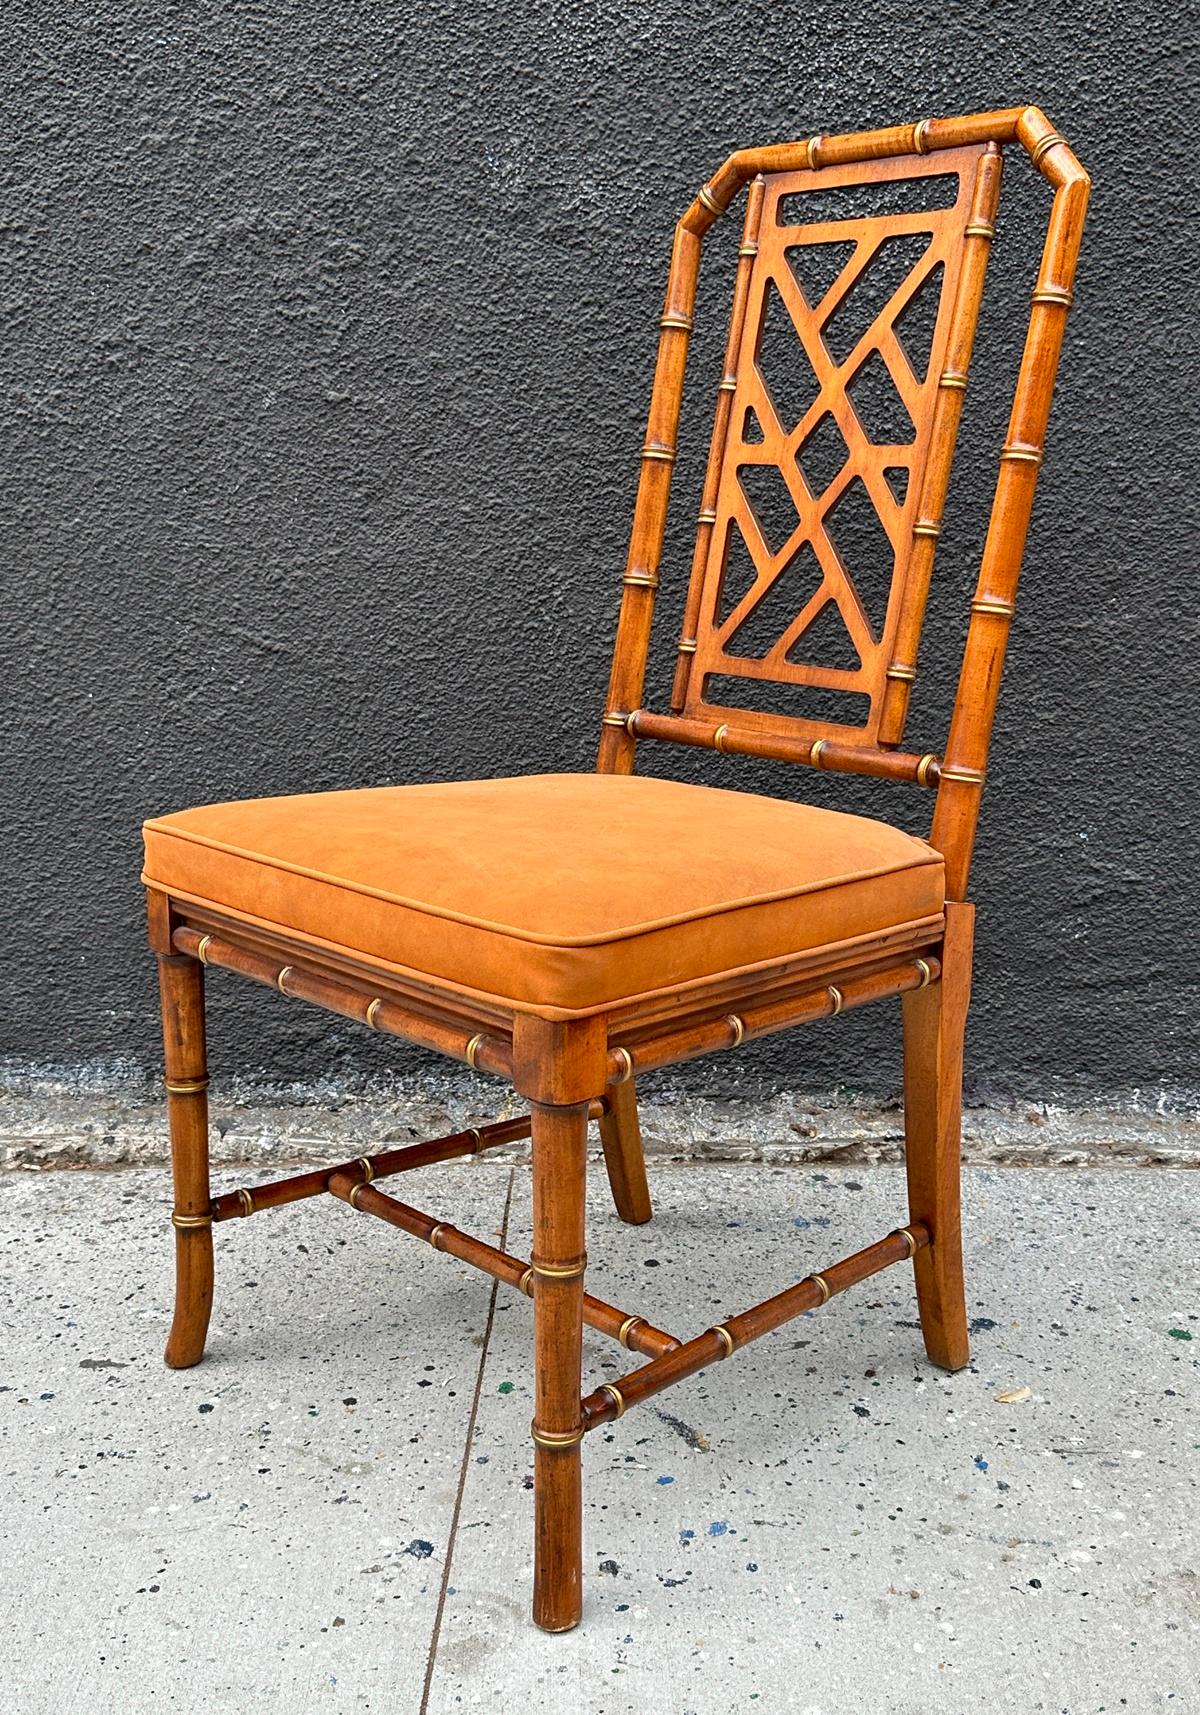 Chinoiserie Style Desk & Chair by Drexel Heritage, USA 1960's For Sale 9